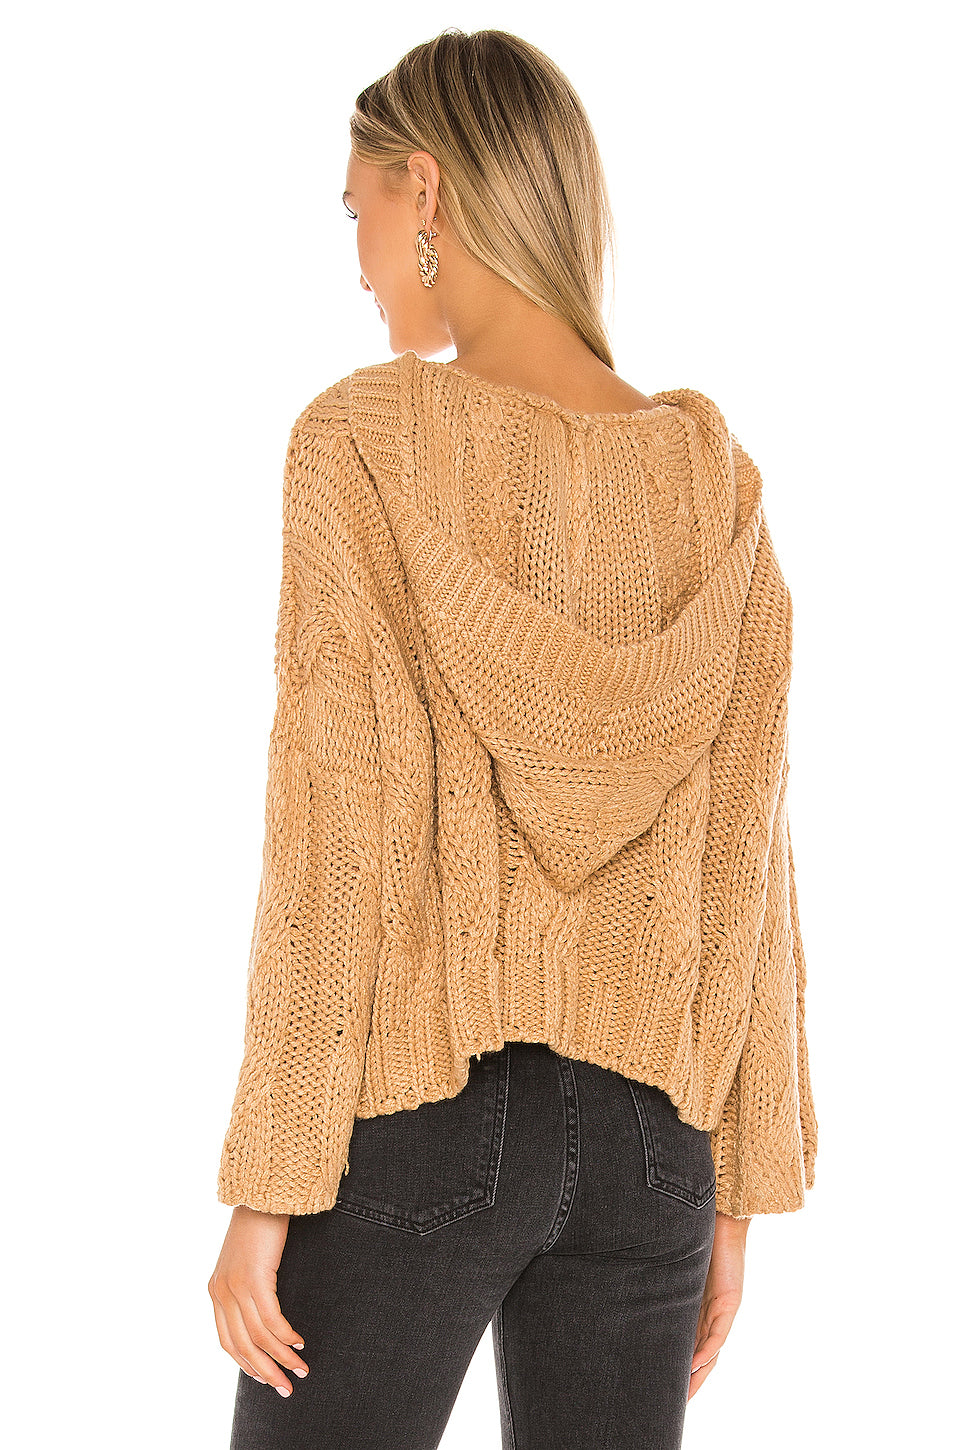 Apryl Pullover Sweater in TAUPE